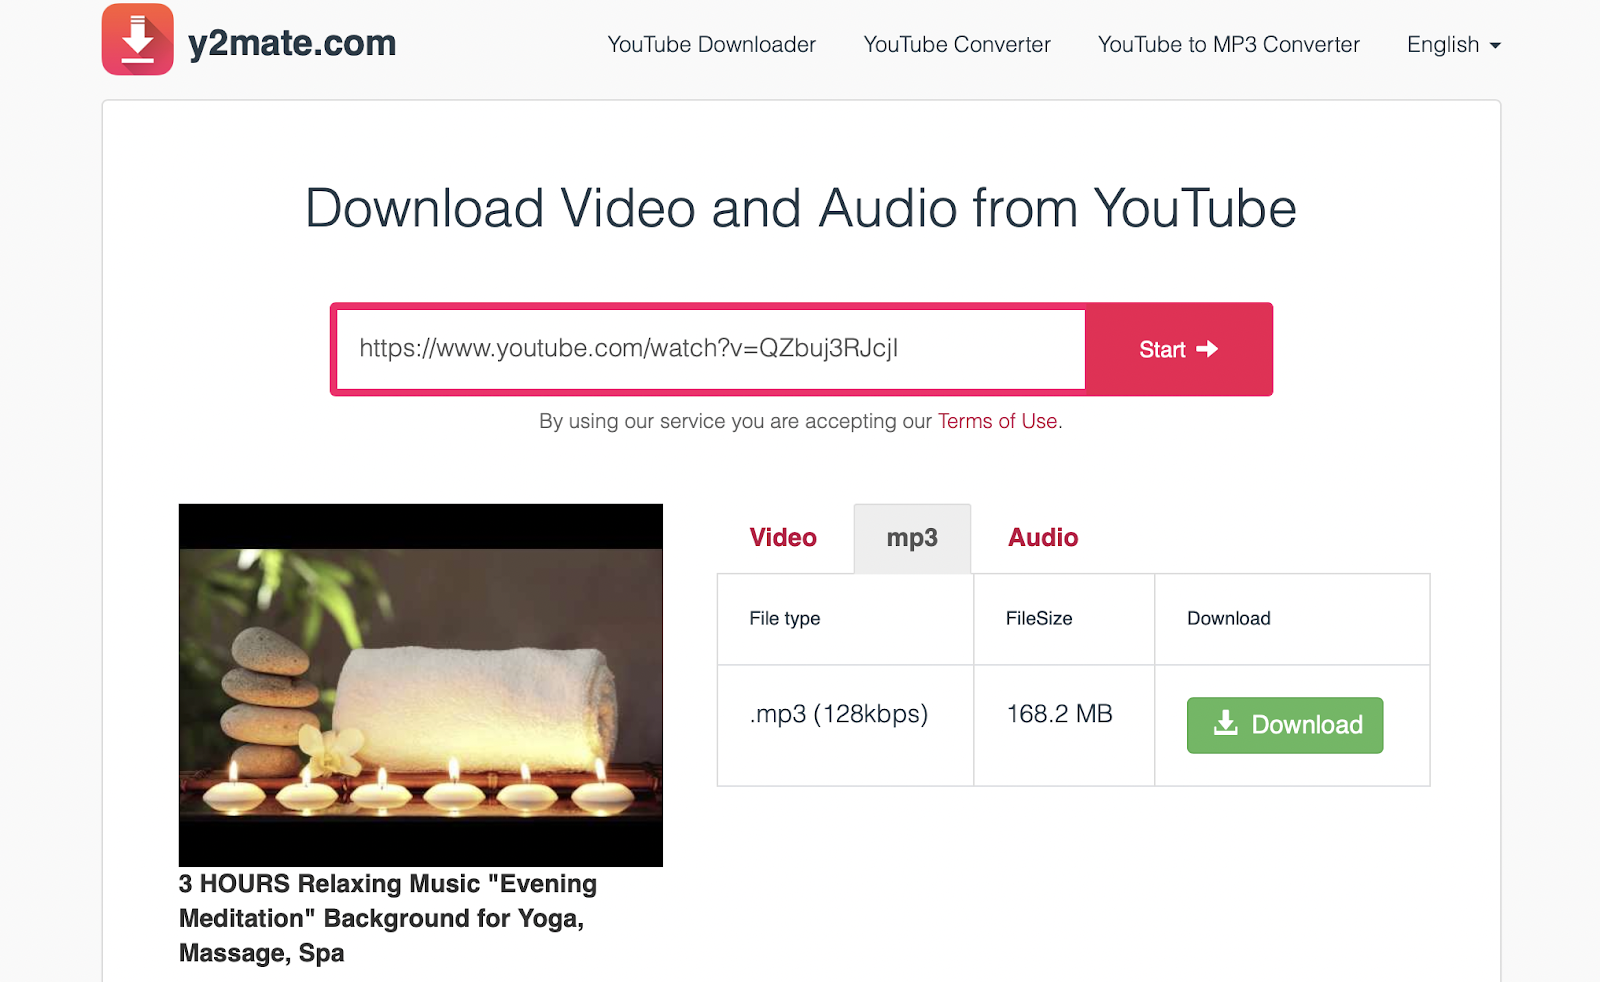 Download audio from YouTube using y2mate.com